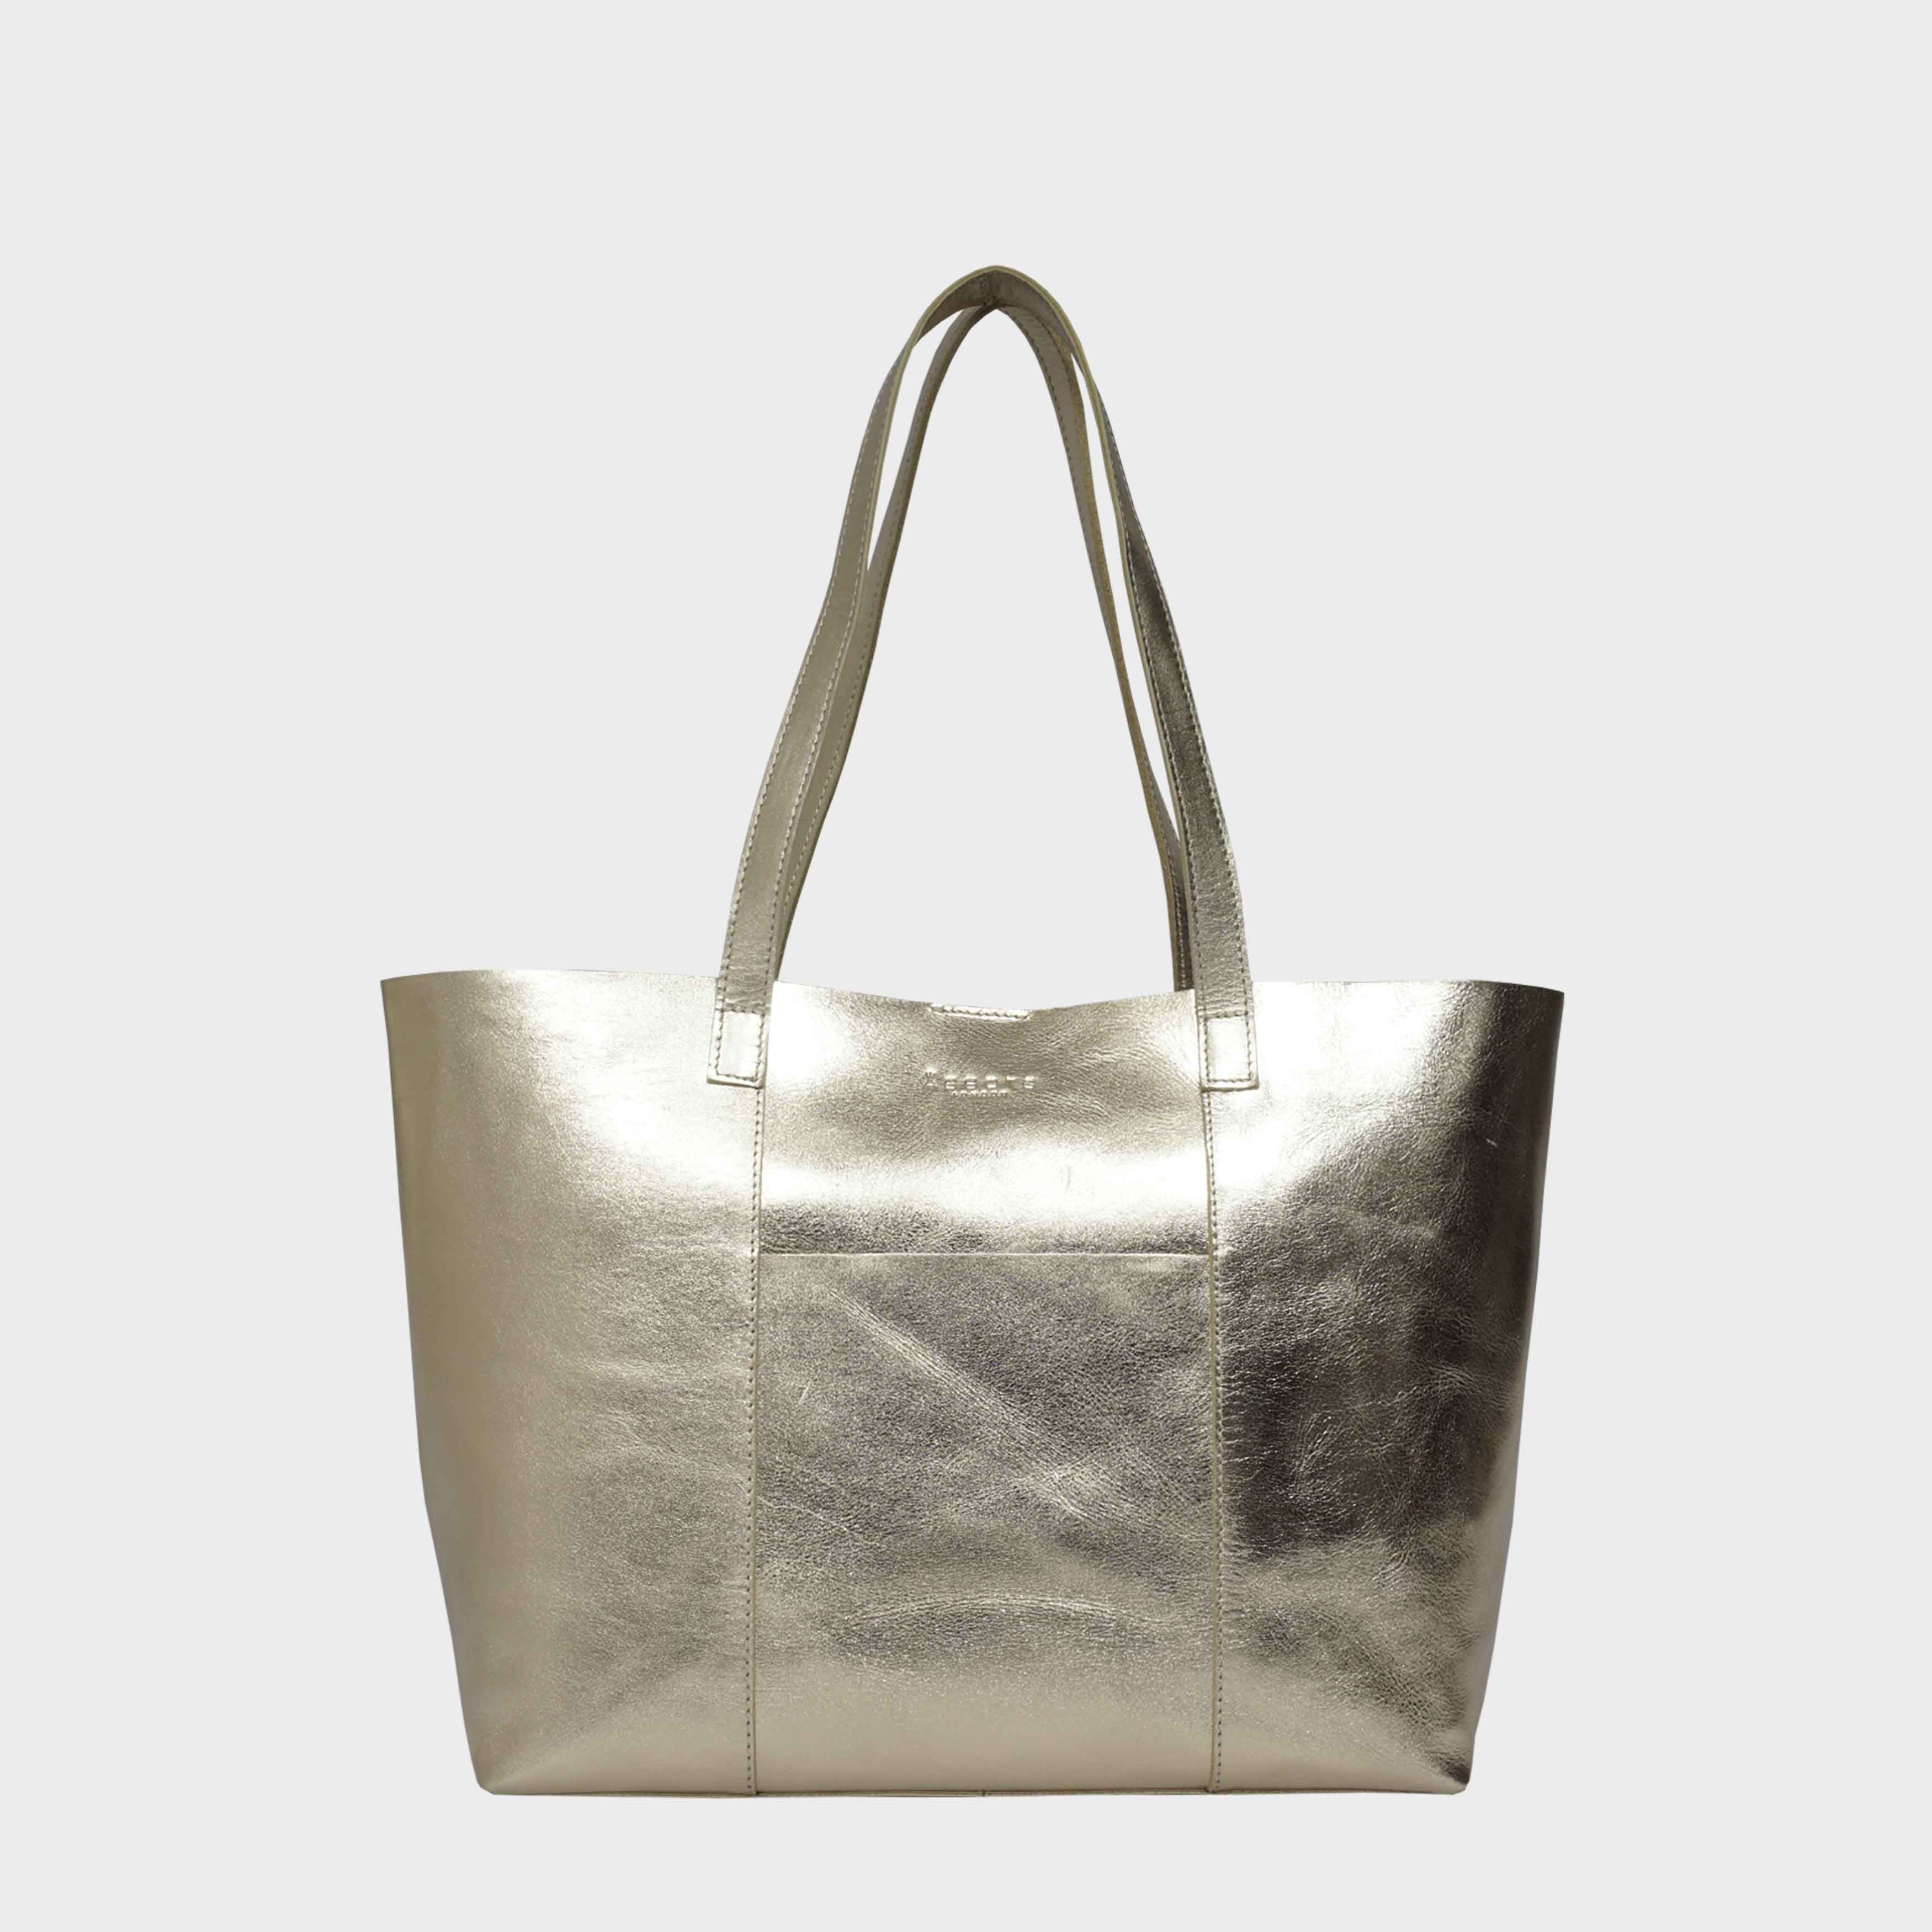 Yellow Gold Metallic Real Leather Shopper Unlined Tote Bag for